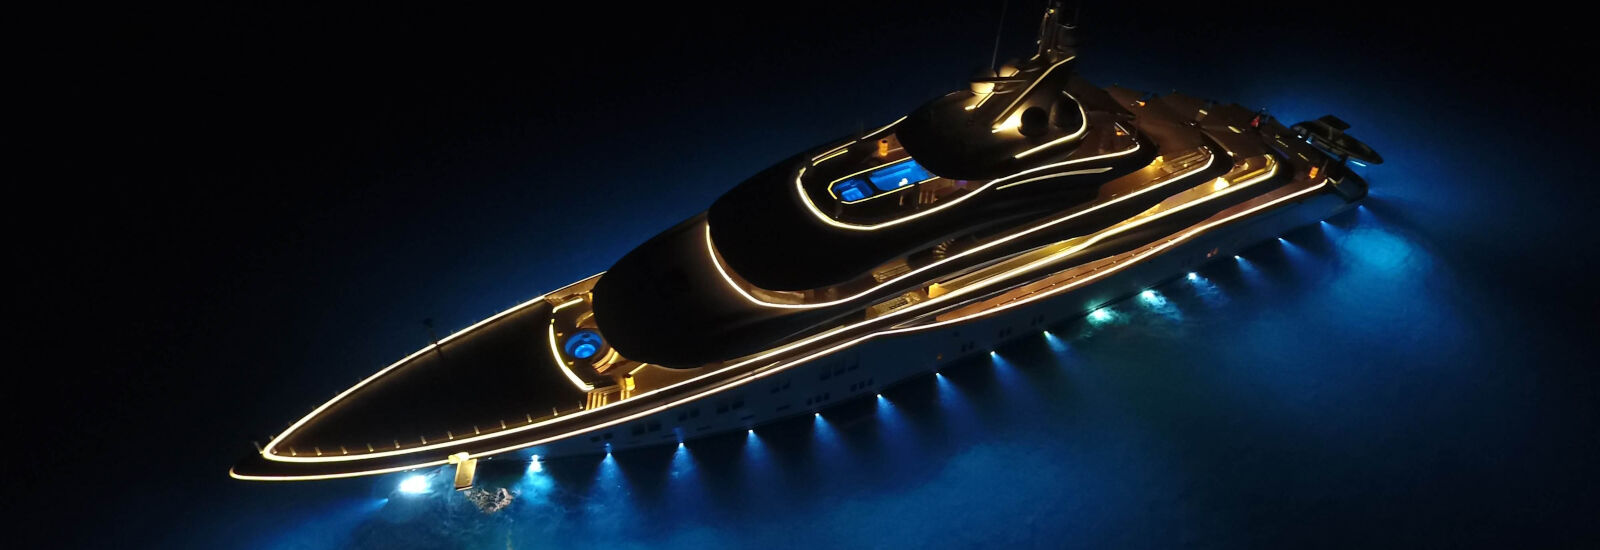 Yacht in the ocean  at night